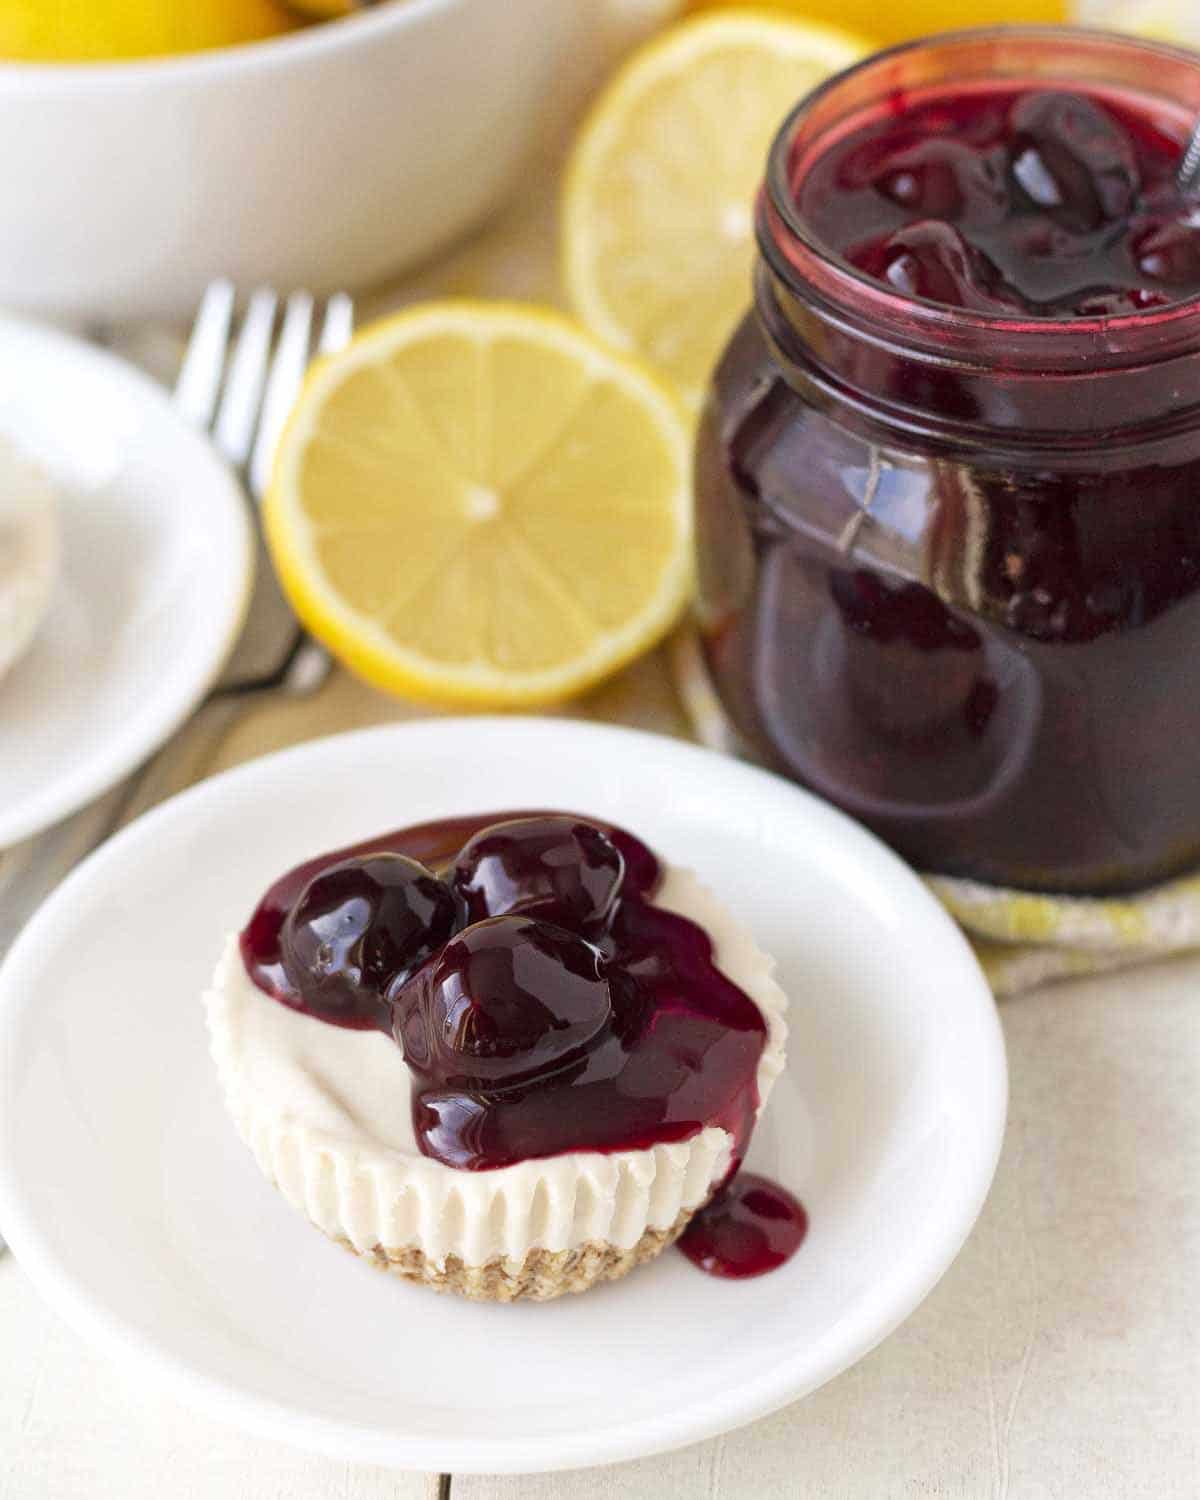 A mini lemon cheesecake on is white plate, cheesecake is topped with cherry sauce.